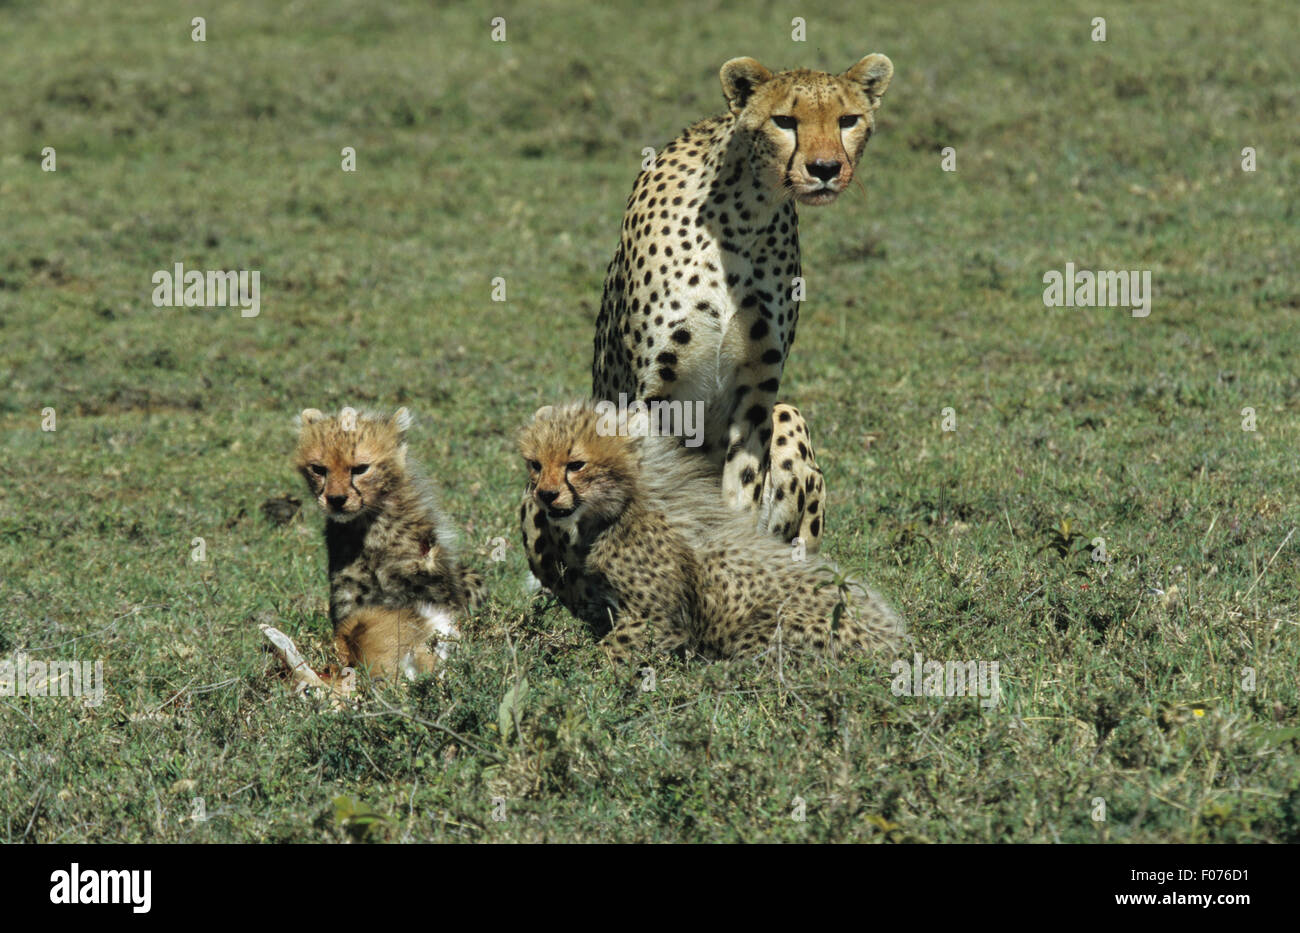 Cheetah taken from front looking at camera sitting on ground with two small cubs and impala kill Stock Photo